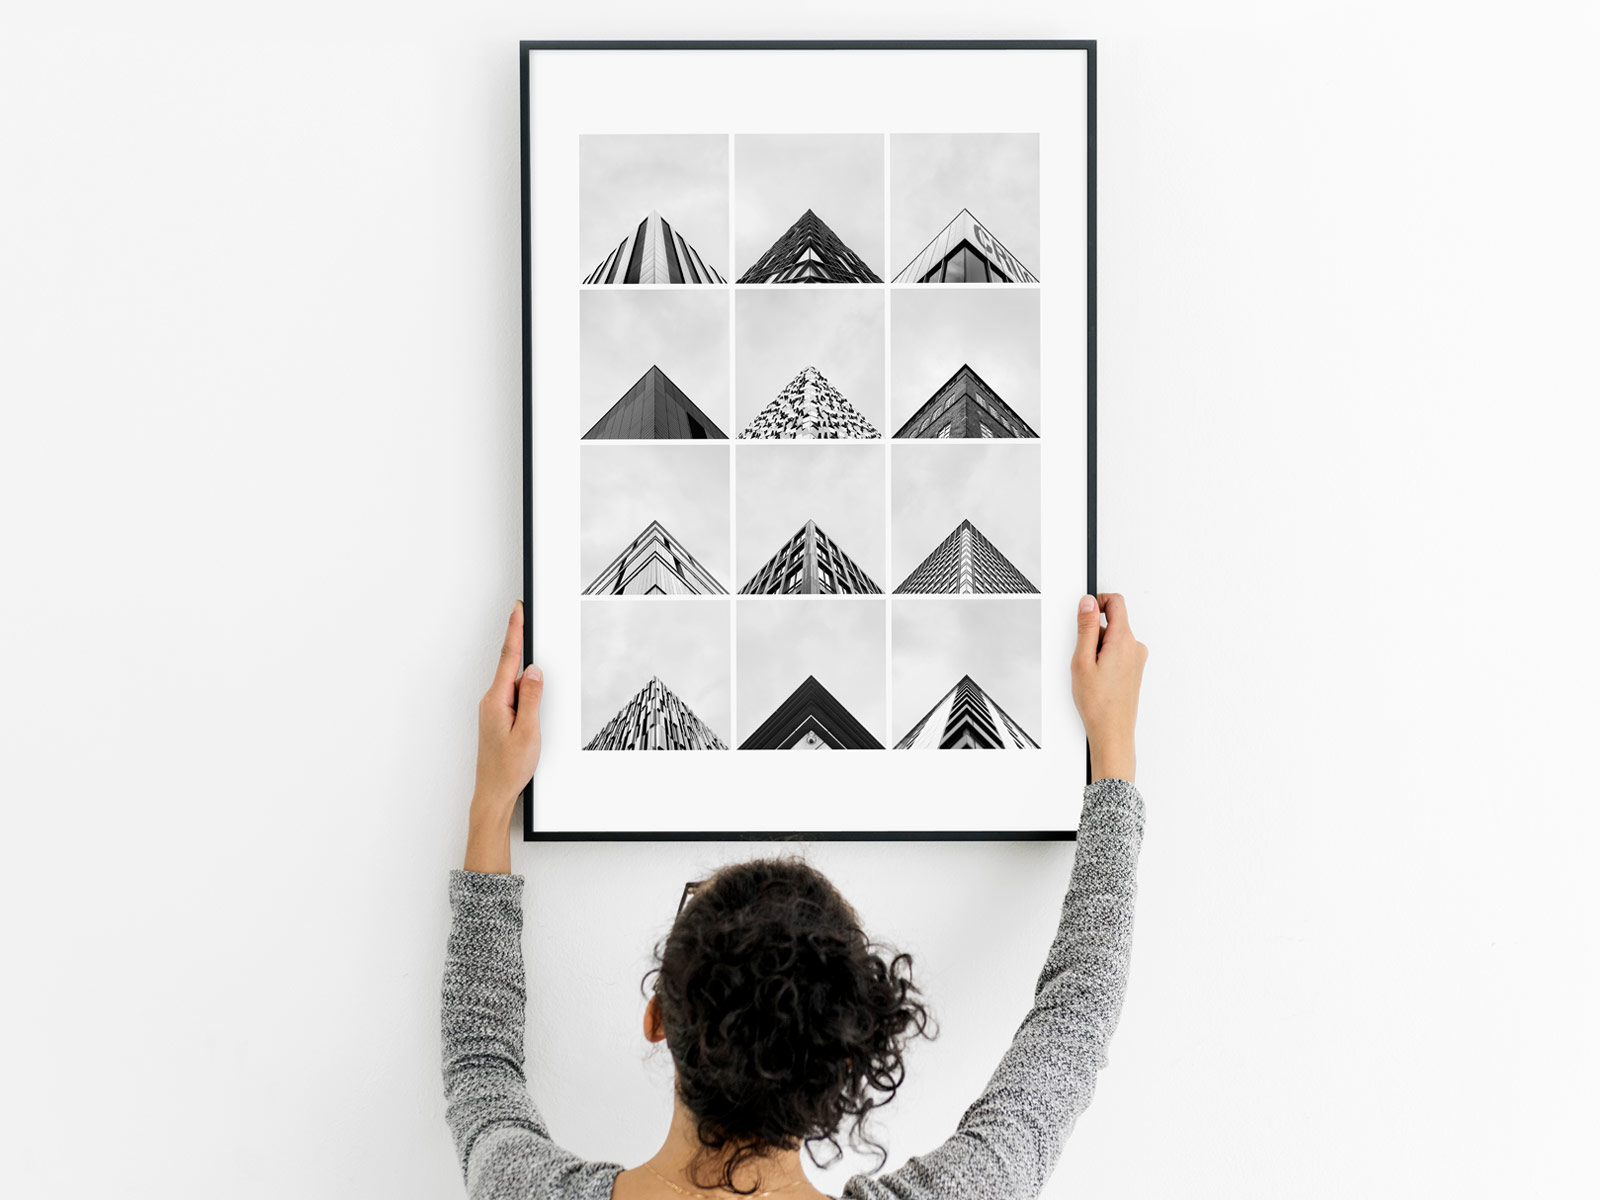 Woman holding a framed print of Sheffield's architecture photographed in the Geometry Club style